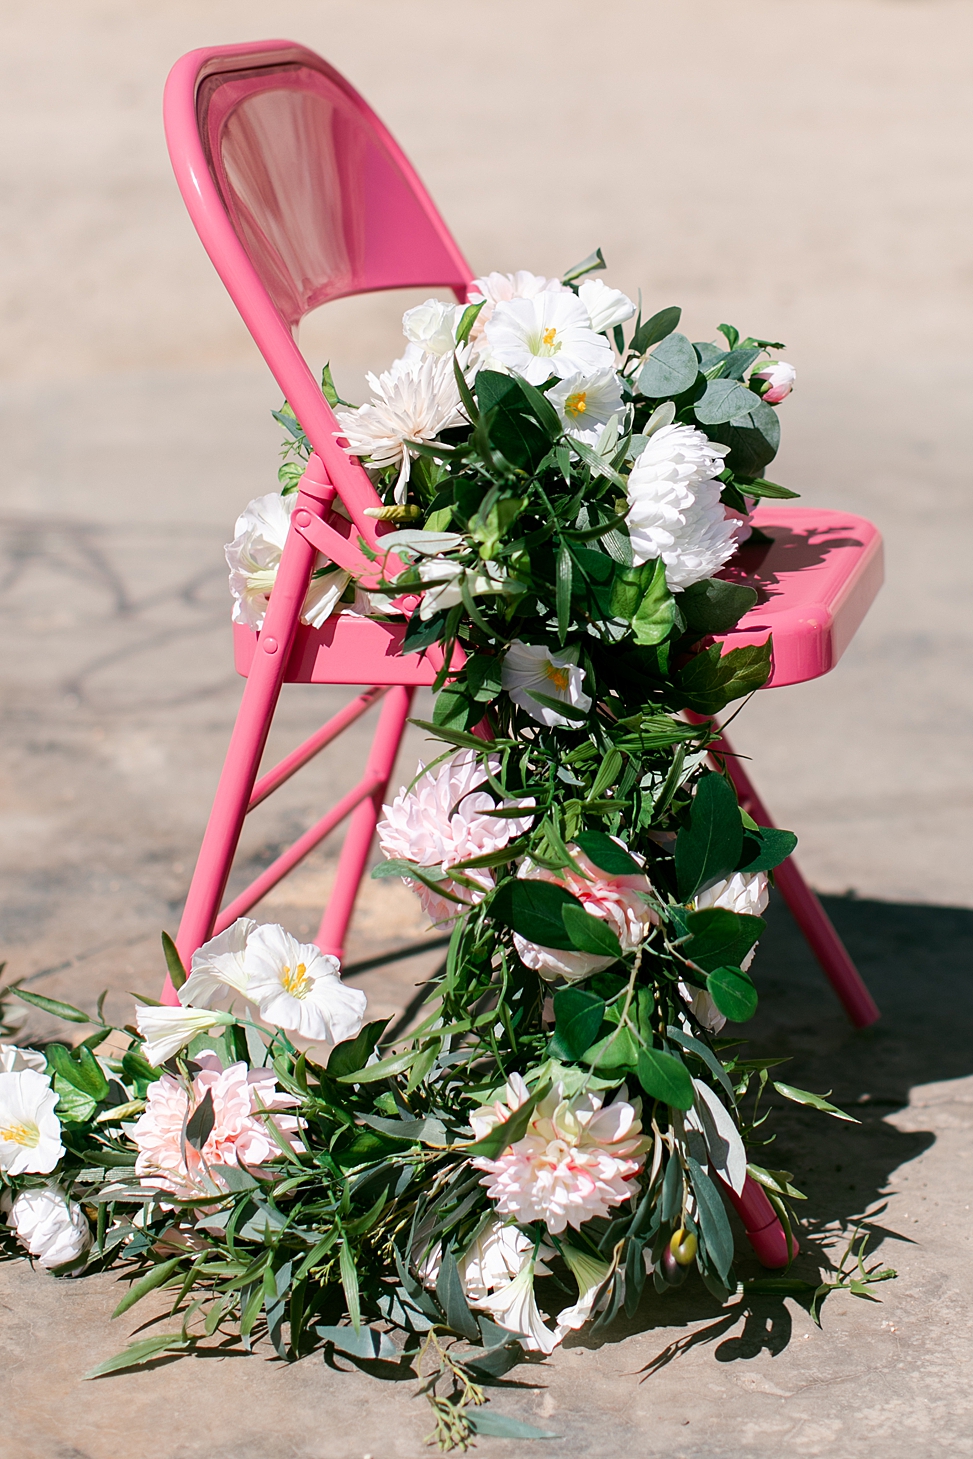 greenery and fake wedding flower whip bouquet laid on a bright pink chair - the Rogue Petal Co.